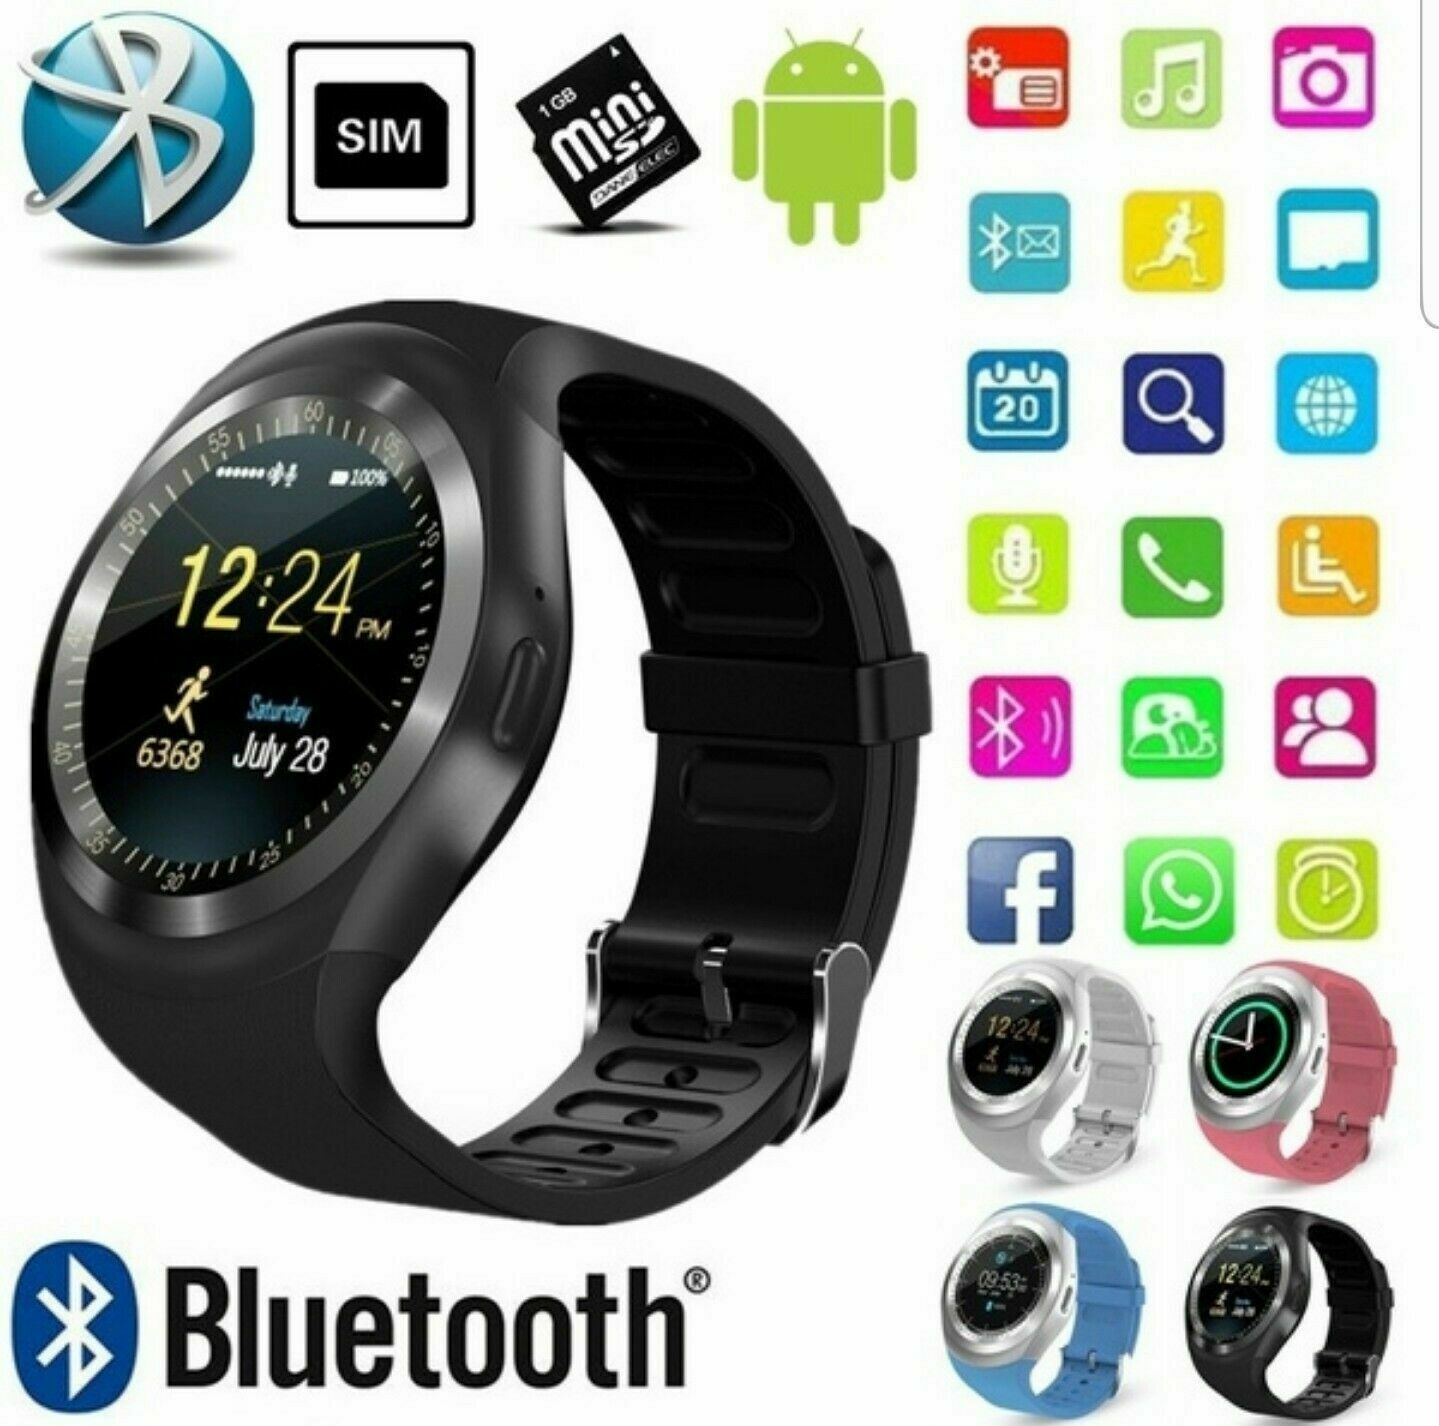 SMART WATCH ANDOWL  A1 IOS ANDROID BT